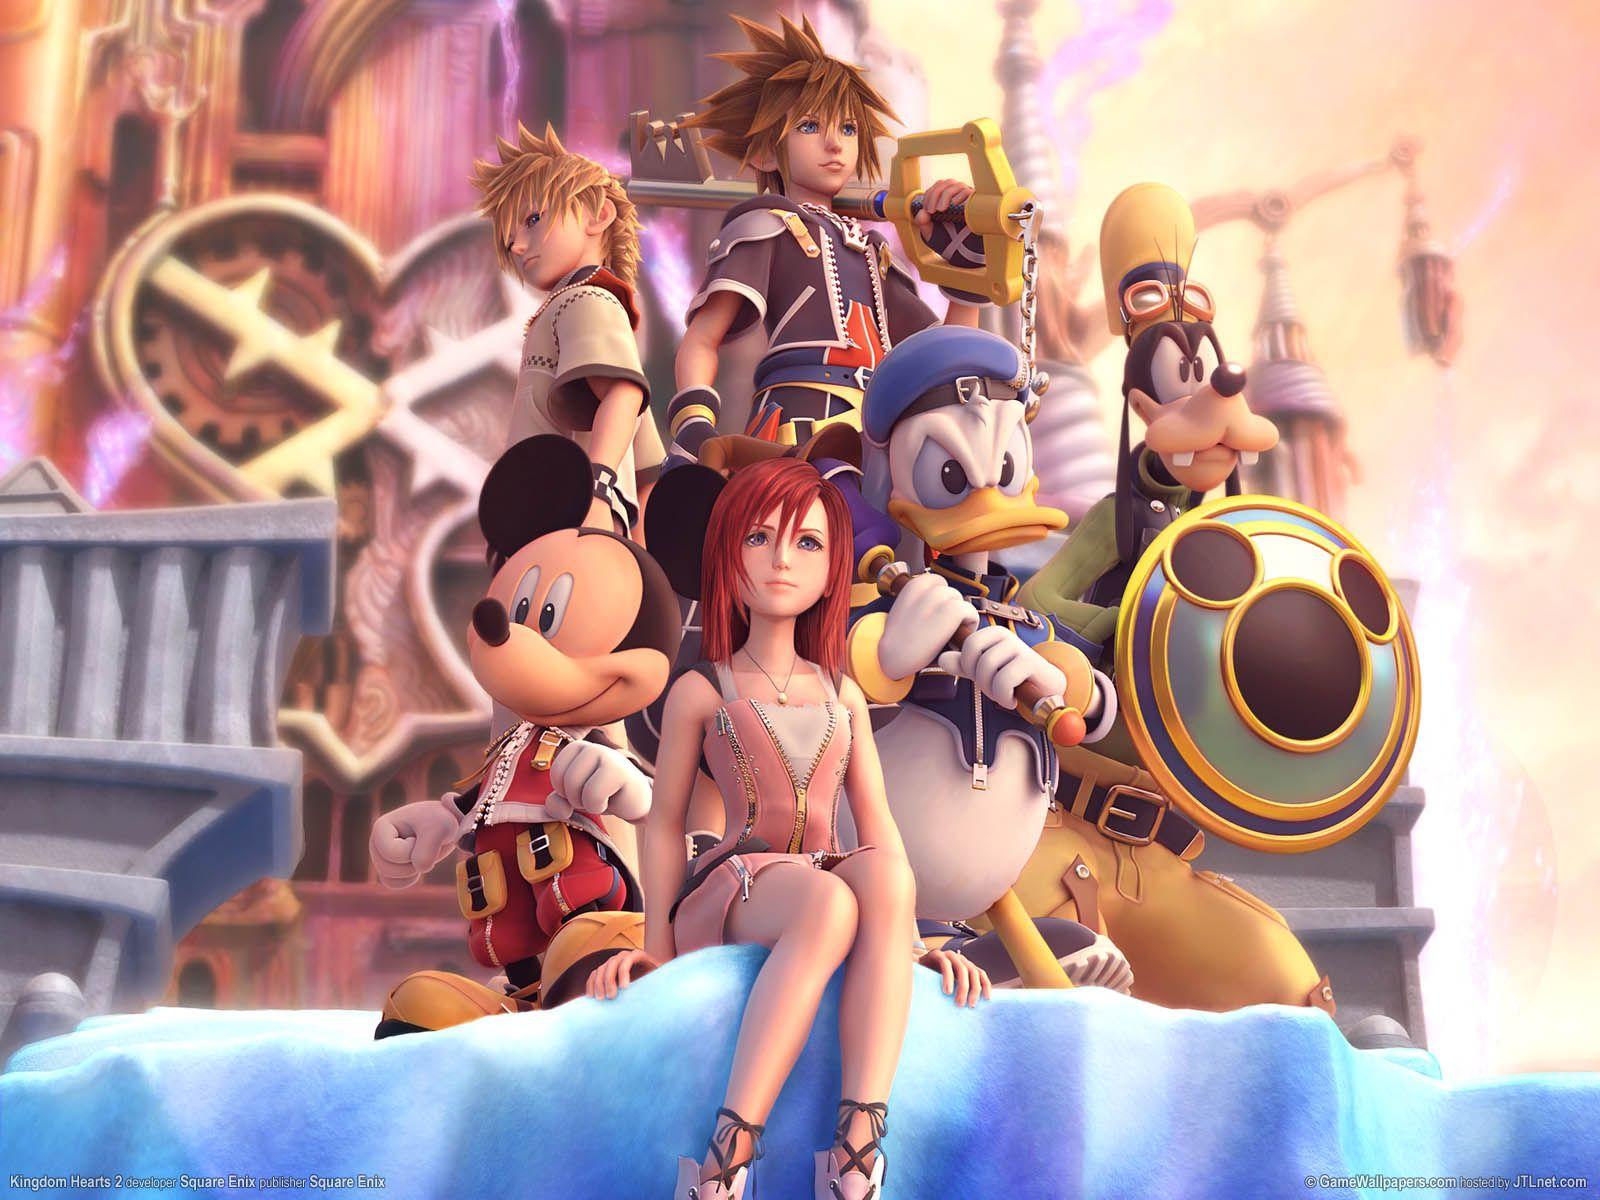 This is what Kingdom Hearts 1.5 HD Remix Actually Looks Like!